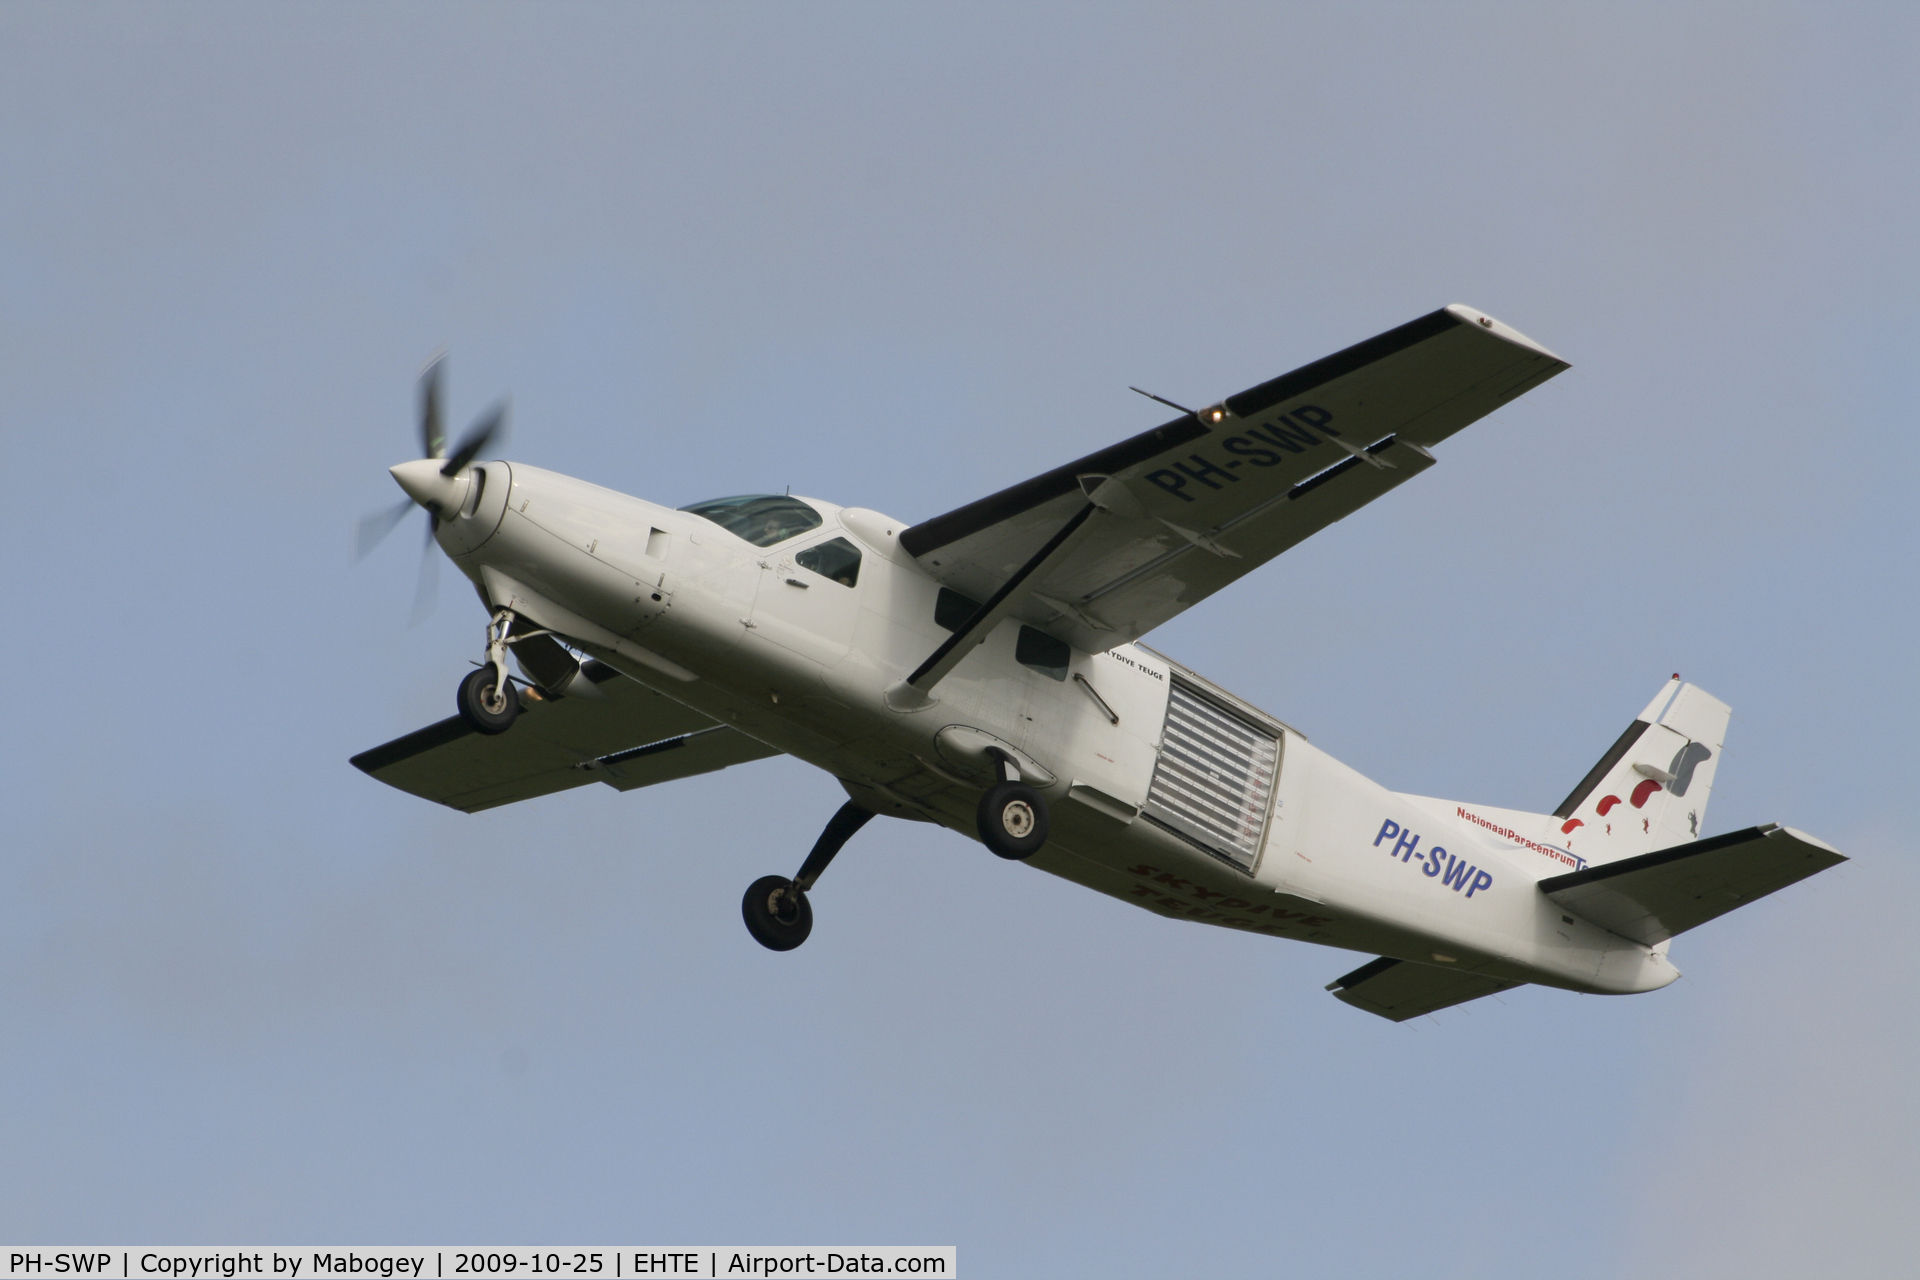 PH-SWP, 2005 Cessna 208B Super Cargomaster C/N 208B1124, Skydivers on their way up...